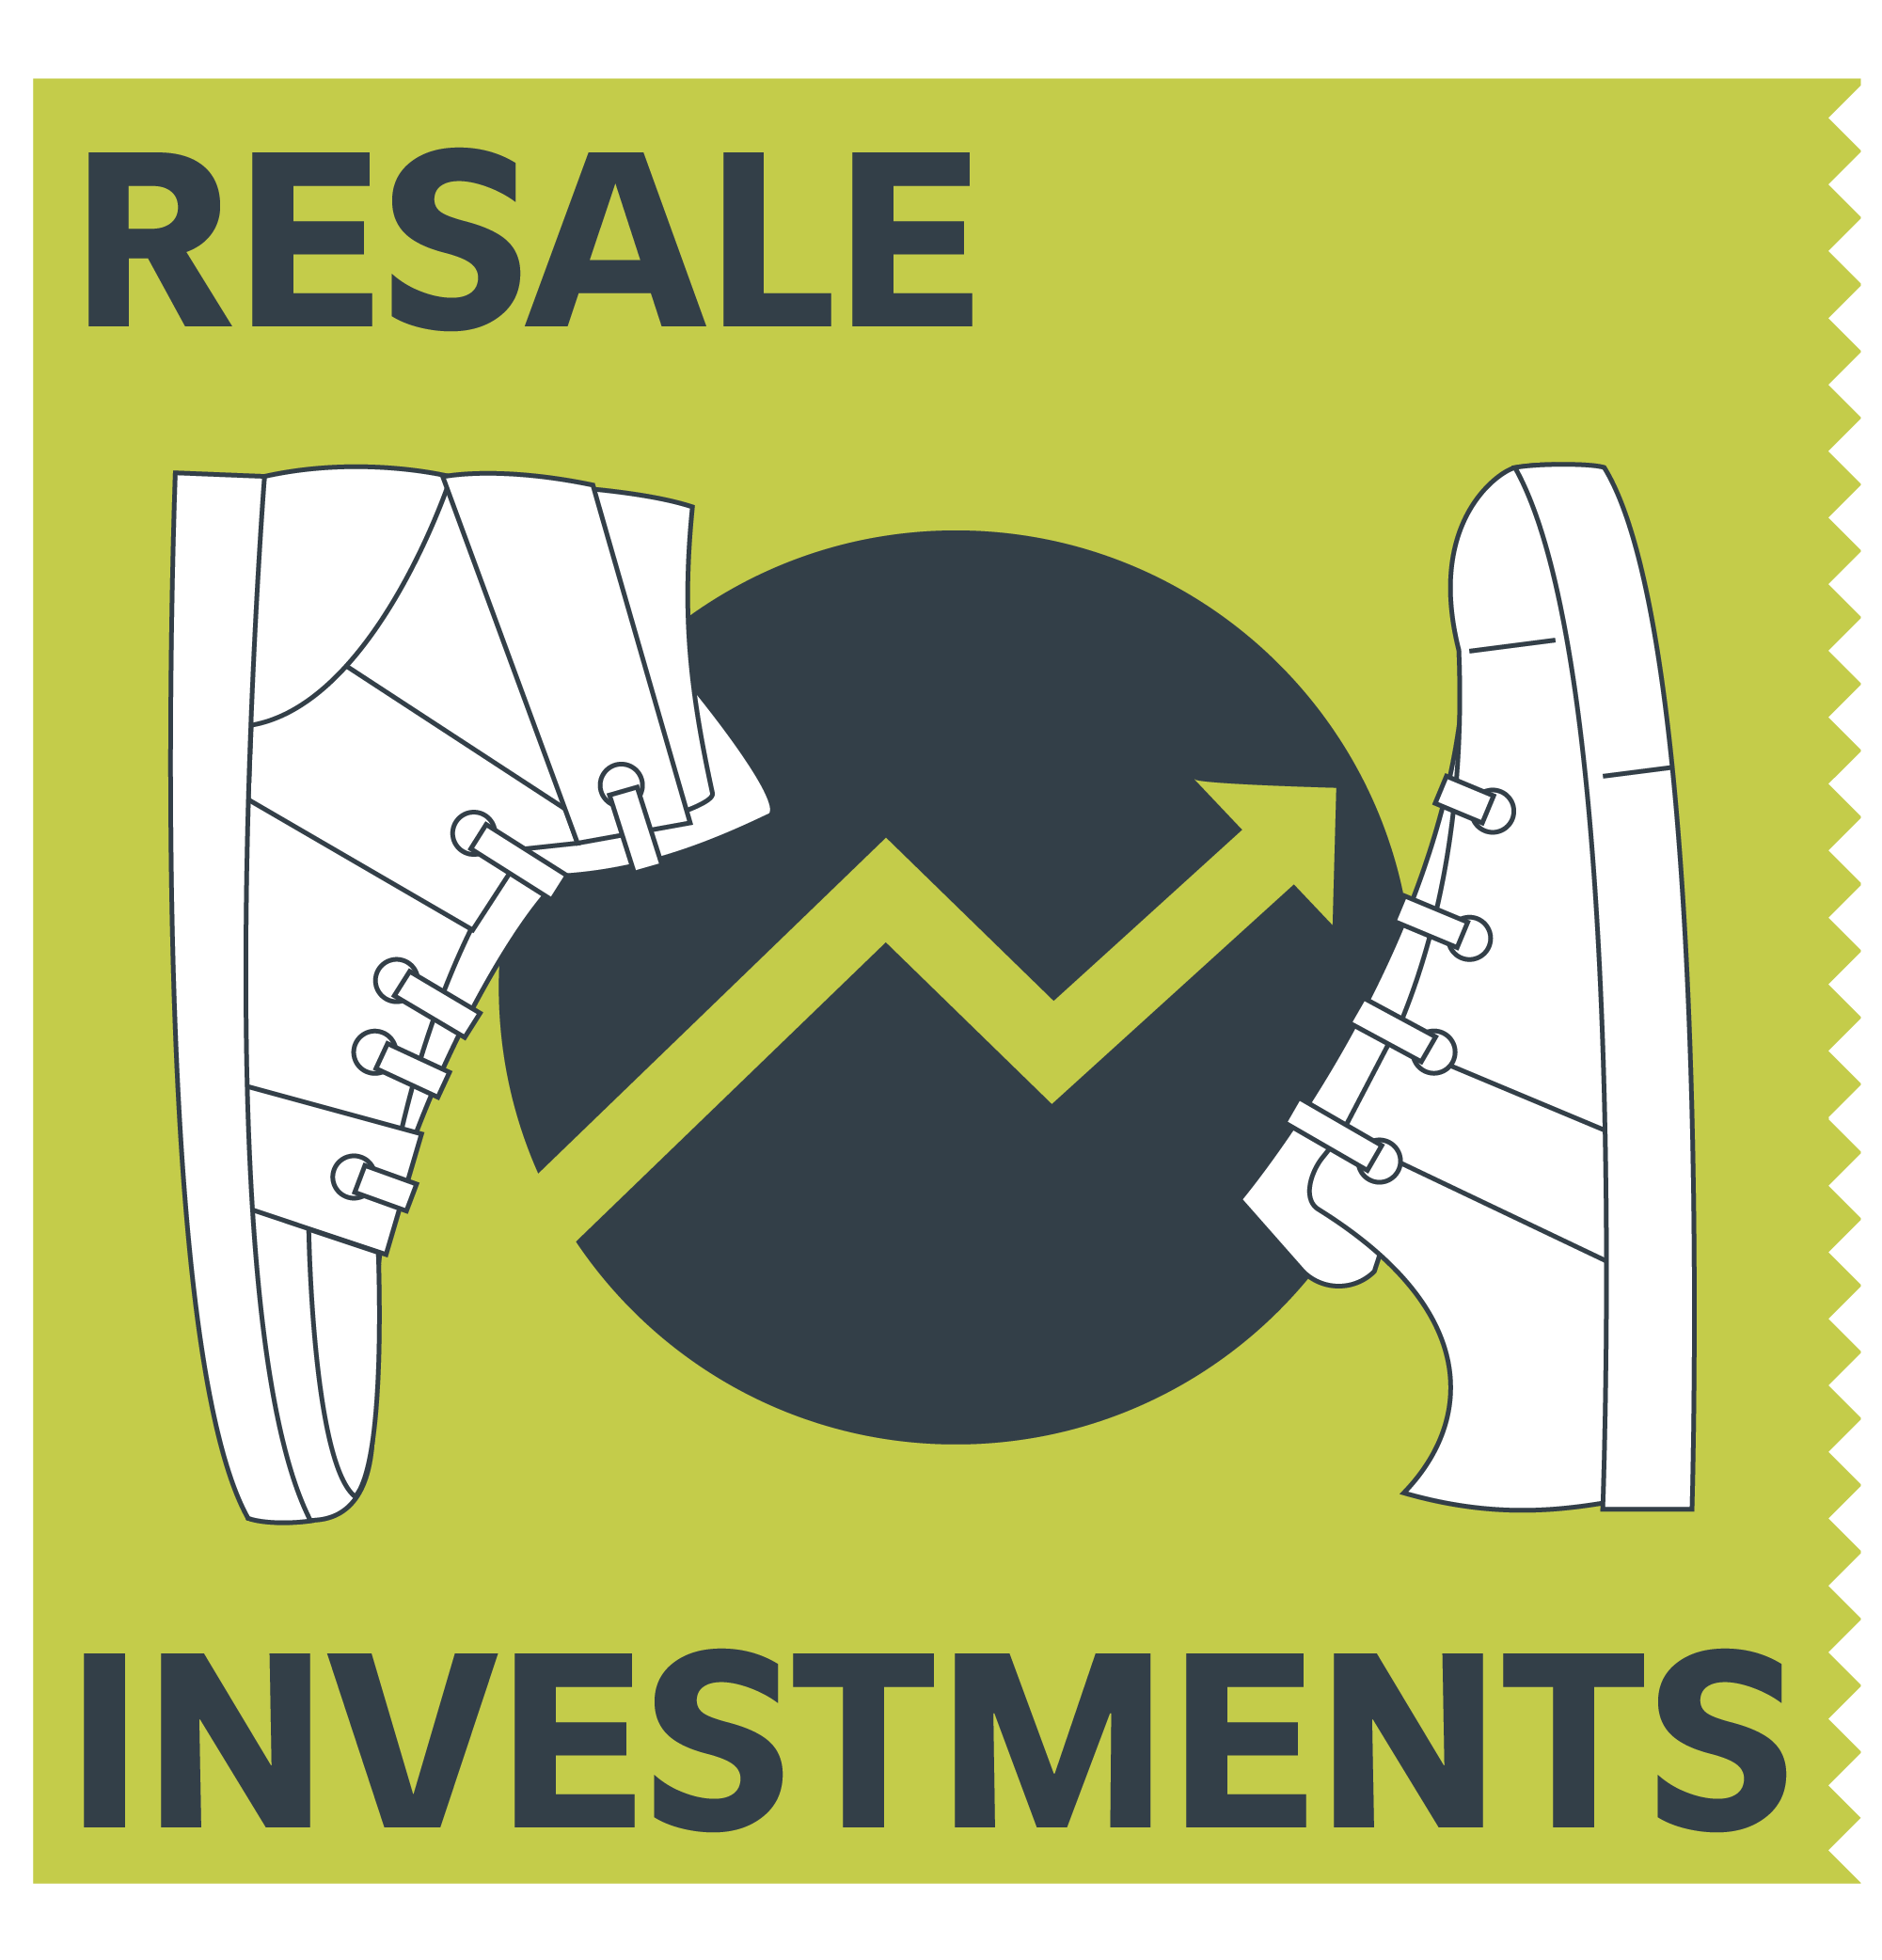 Make money in the resale market and teach yourself how to invest